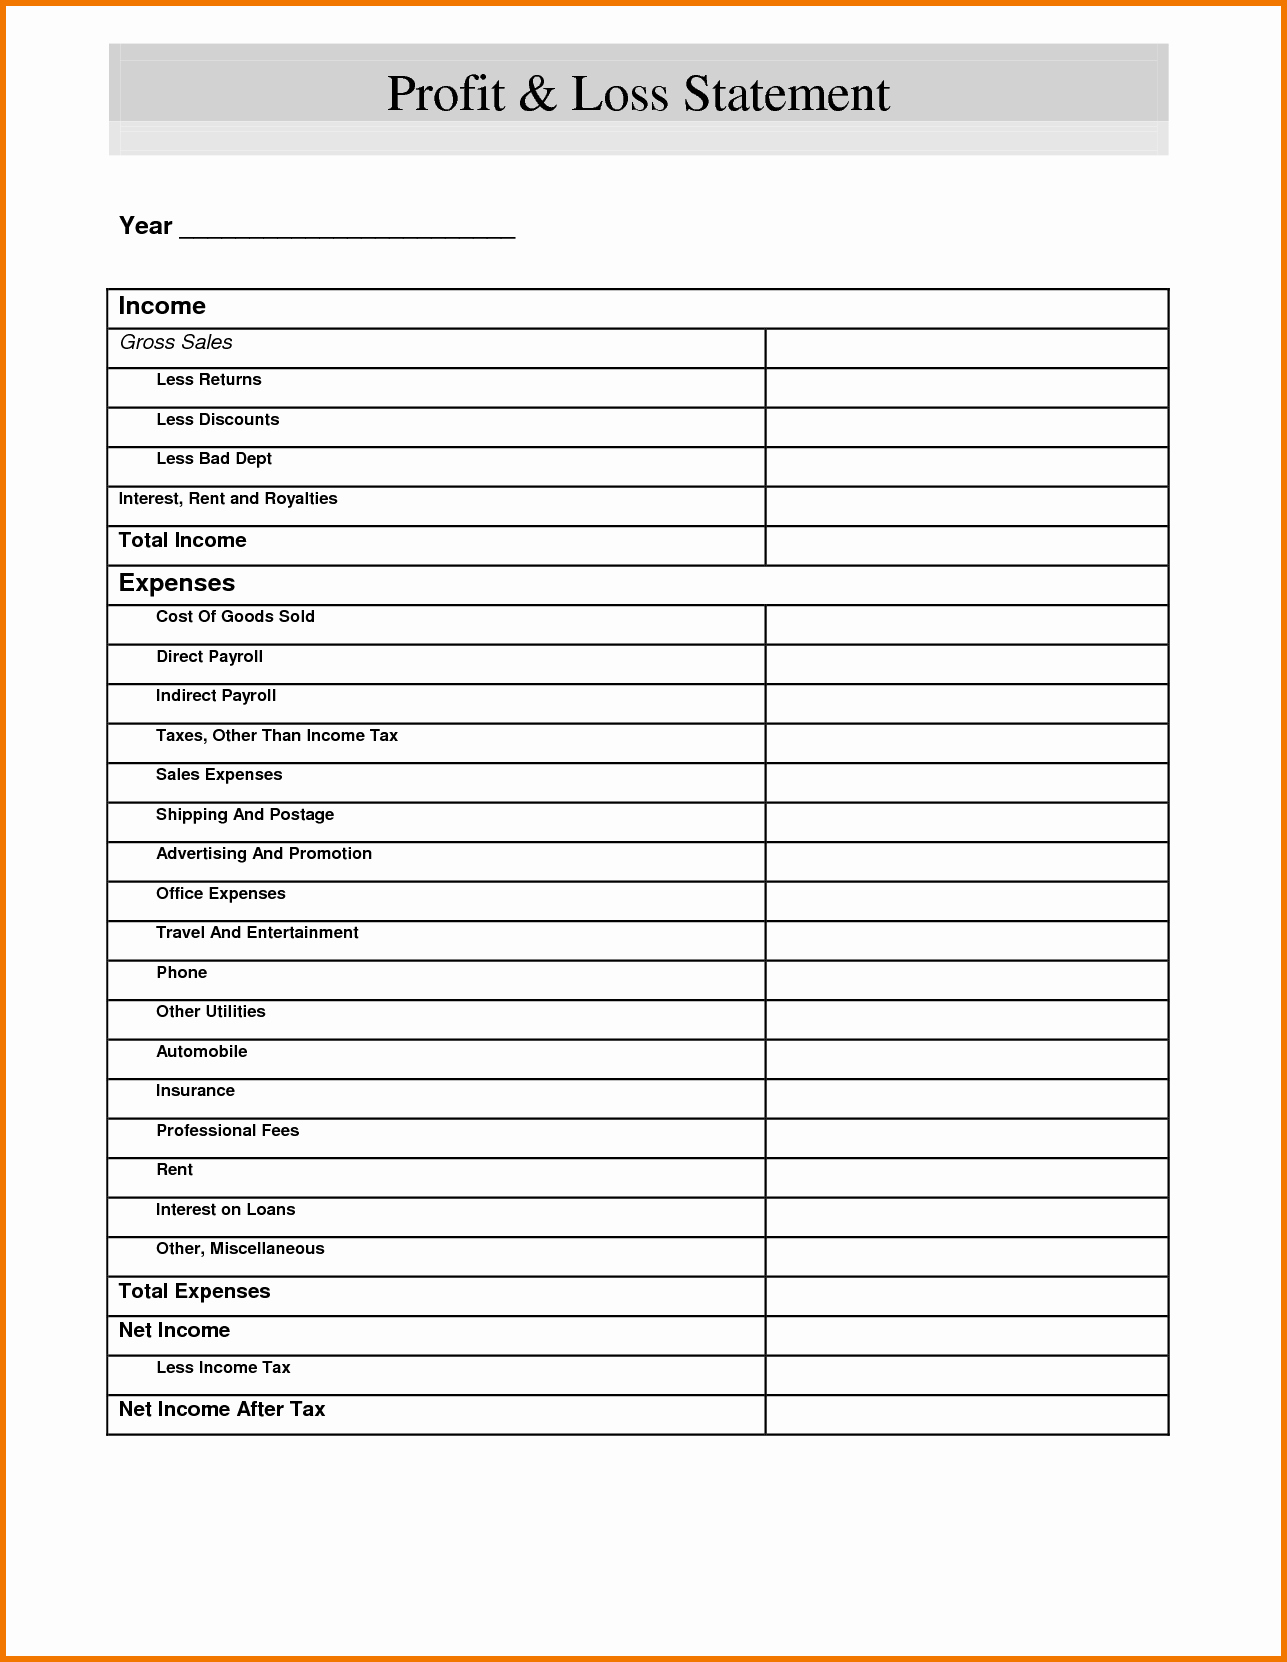 Profit and Loss Free Template Inspirational Profit and Loss Statement Template Free Download